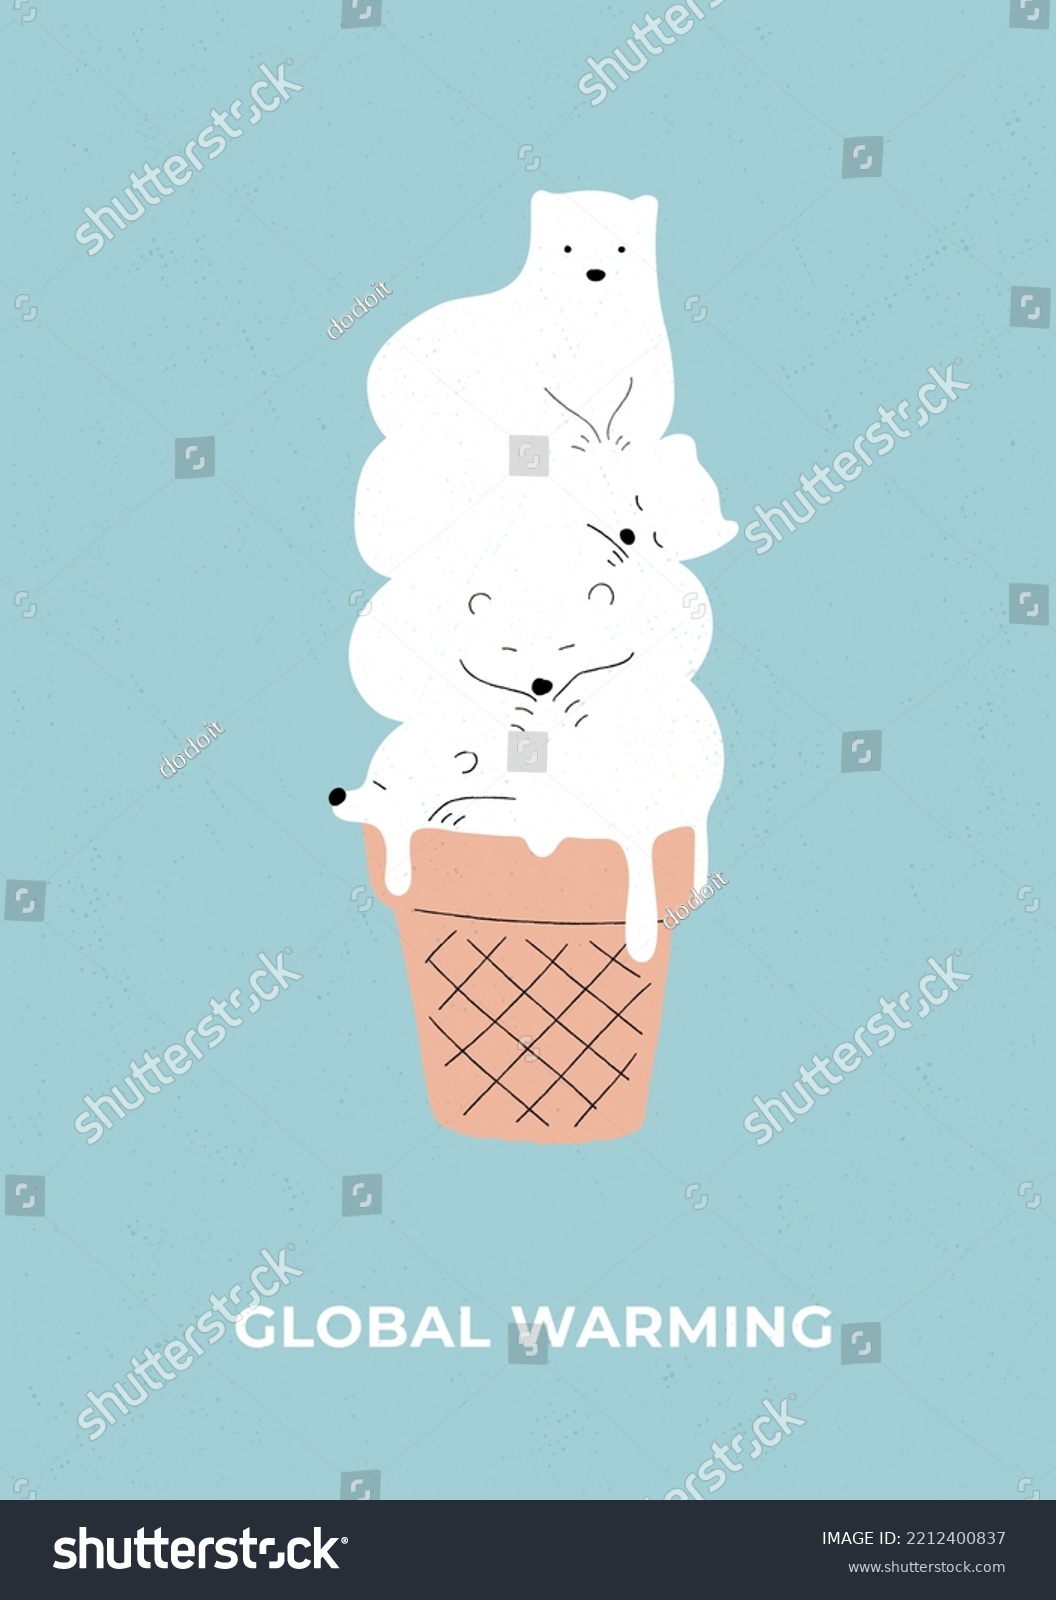 SVG of The white bear ice cream is melting. Symbol of global warming. Earth Day, Climat change, Polar bear concept. Melting arctic or antarctic glacier. Flat vector illustration. Hand drawn style. svg